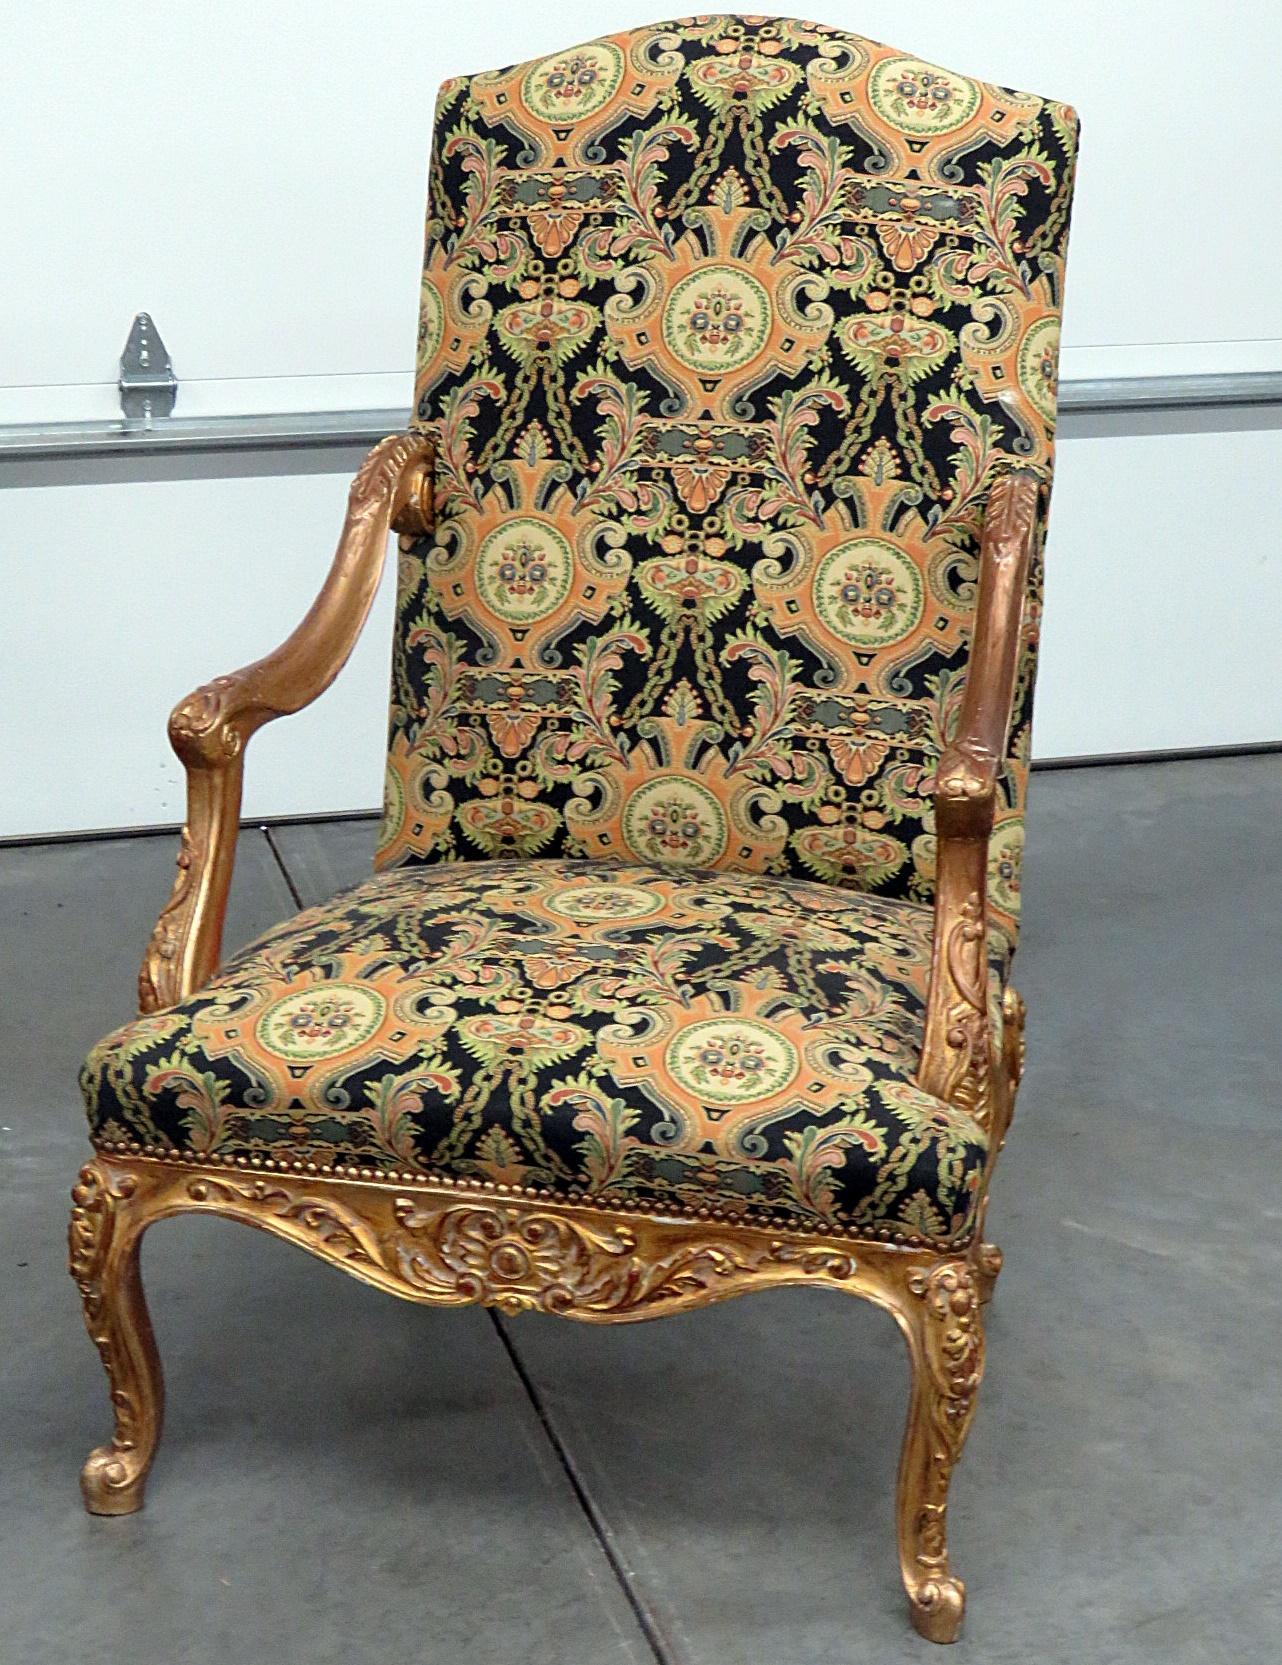 Pair of Louis XVI machine tapestry armchairs with distressed gilt accents.